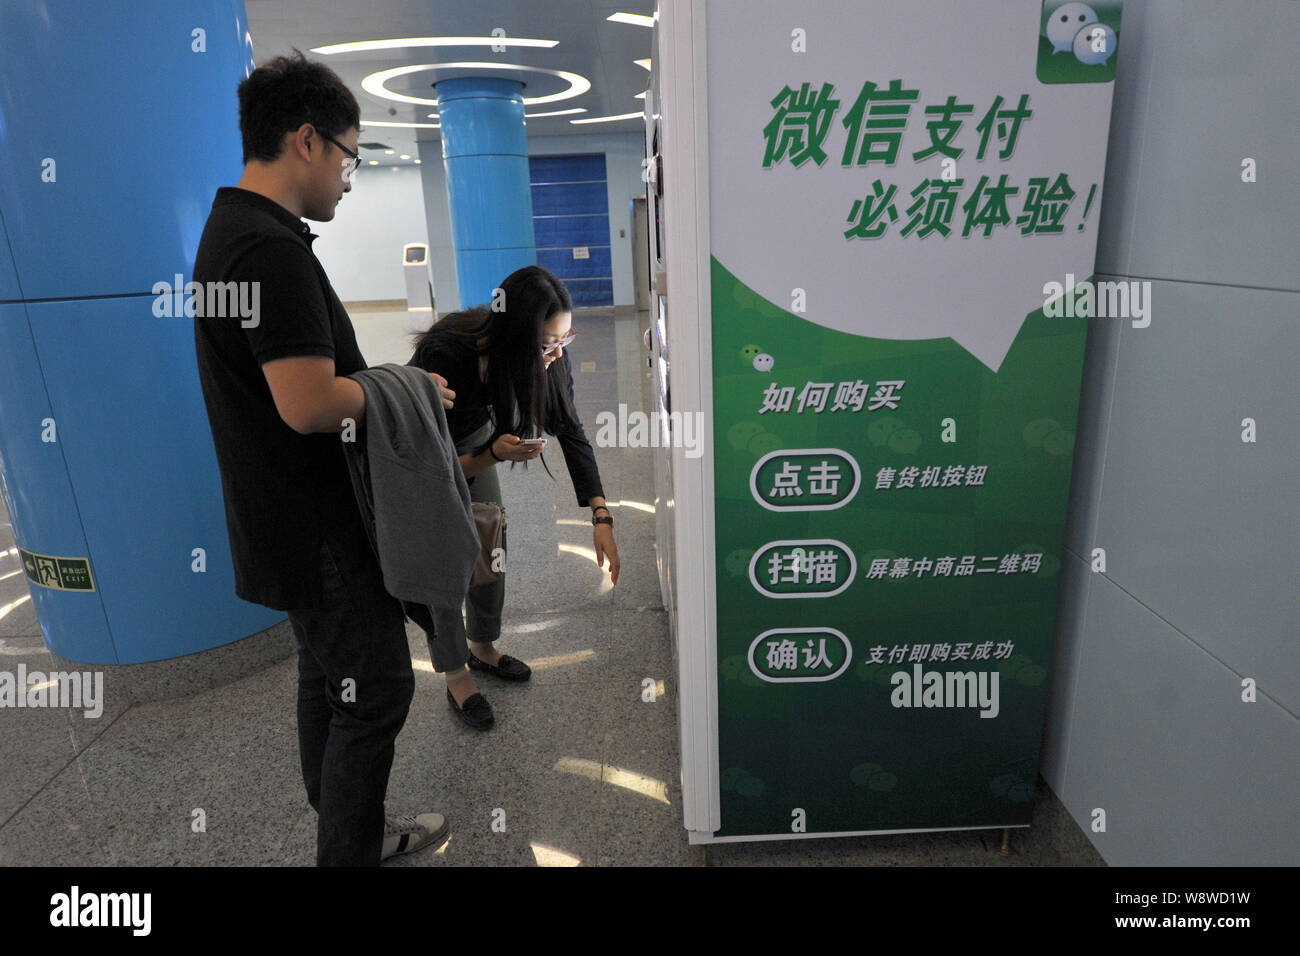 --FILE--Chinese customers buy bottled drinks on a vending machine by the Wechat app at a subway station in Beijing, China, 26 September 2013.   WeChat Stock Photo